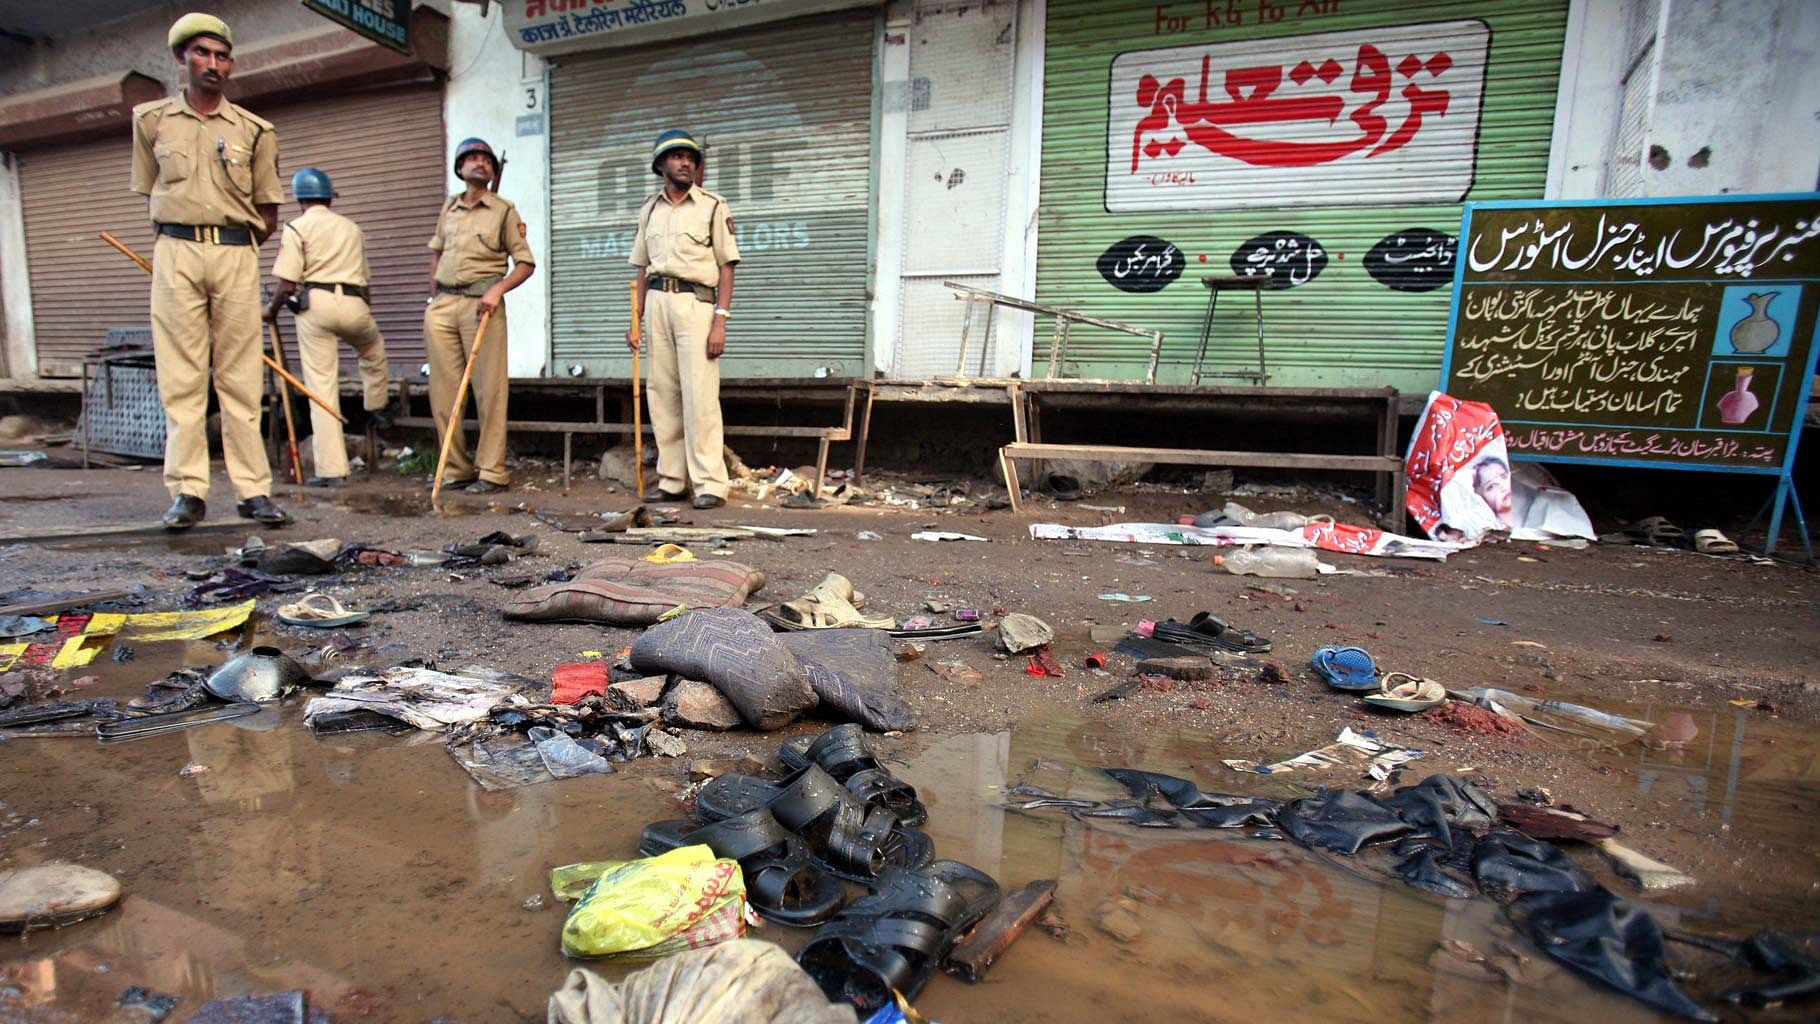 Police officials stand guard at a blast site outside a mosque in Malegaon, 260km (162 miles) northeast of Mumbai on 9 September 2006. (Photo: Reuters)